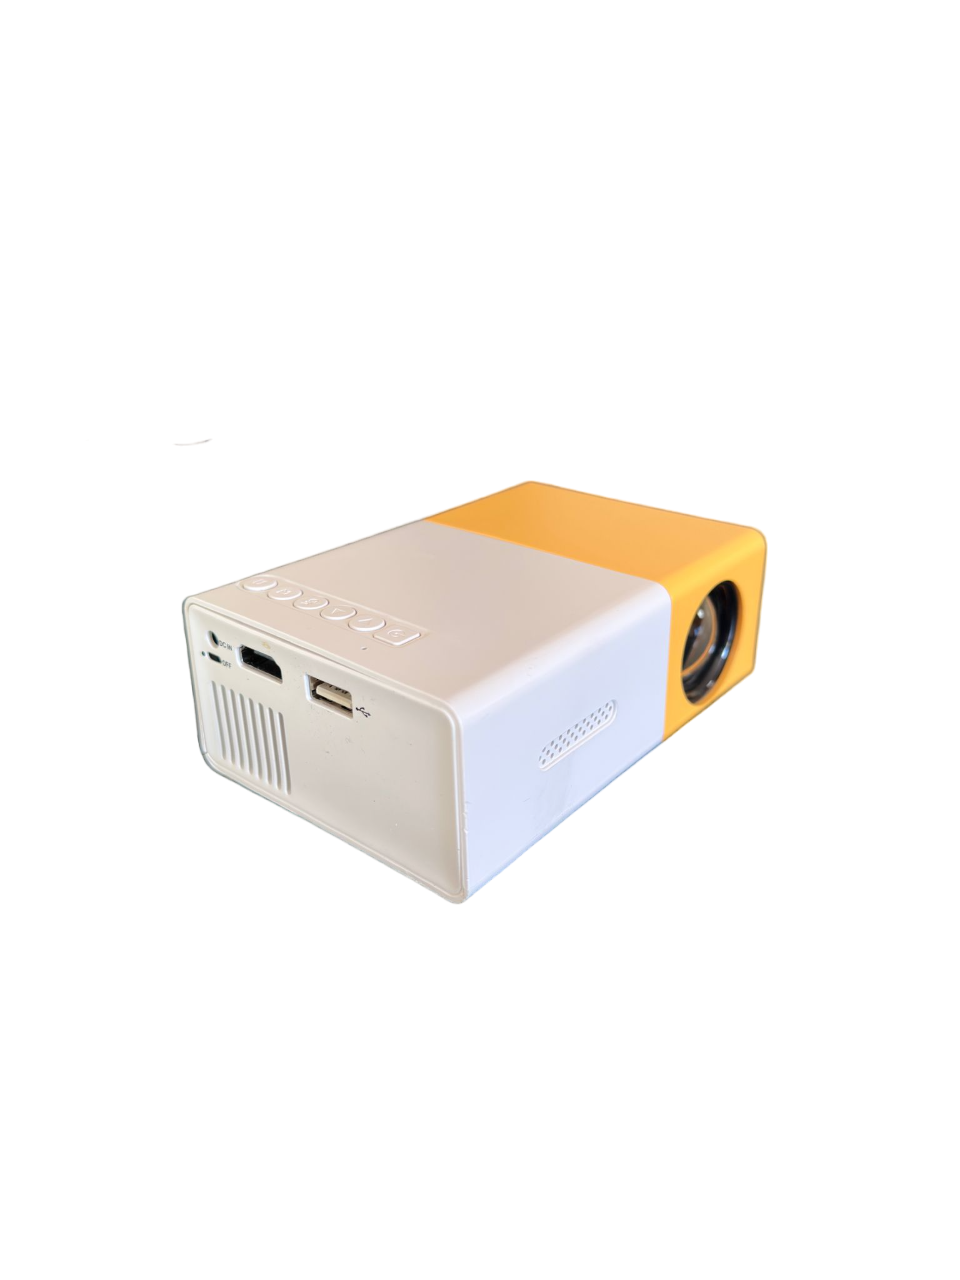 Mini Portable HD Projector for Movies